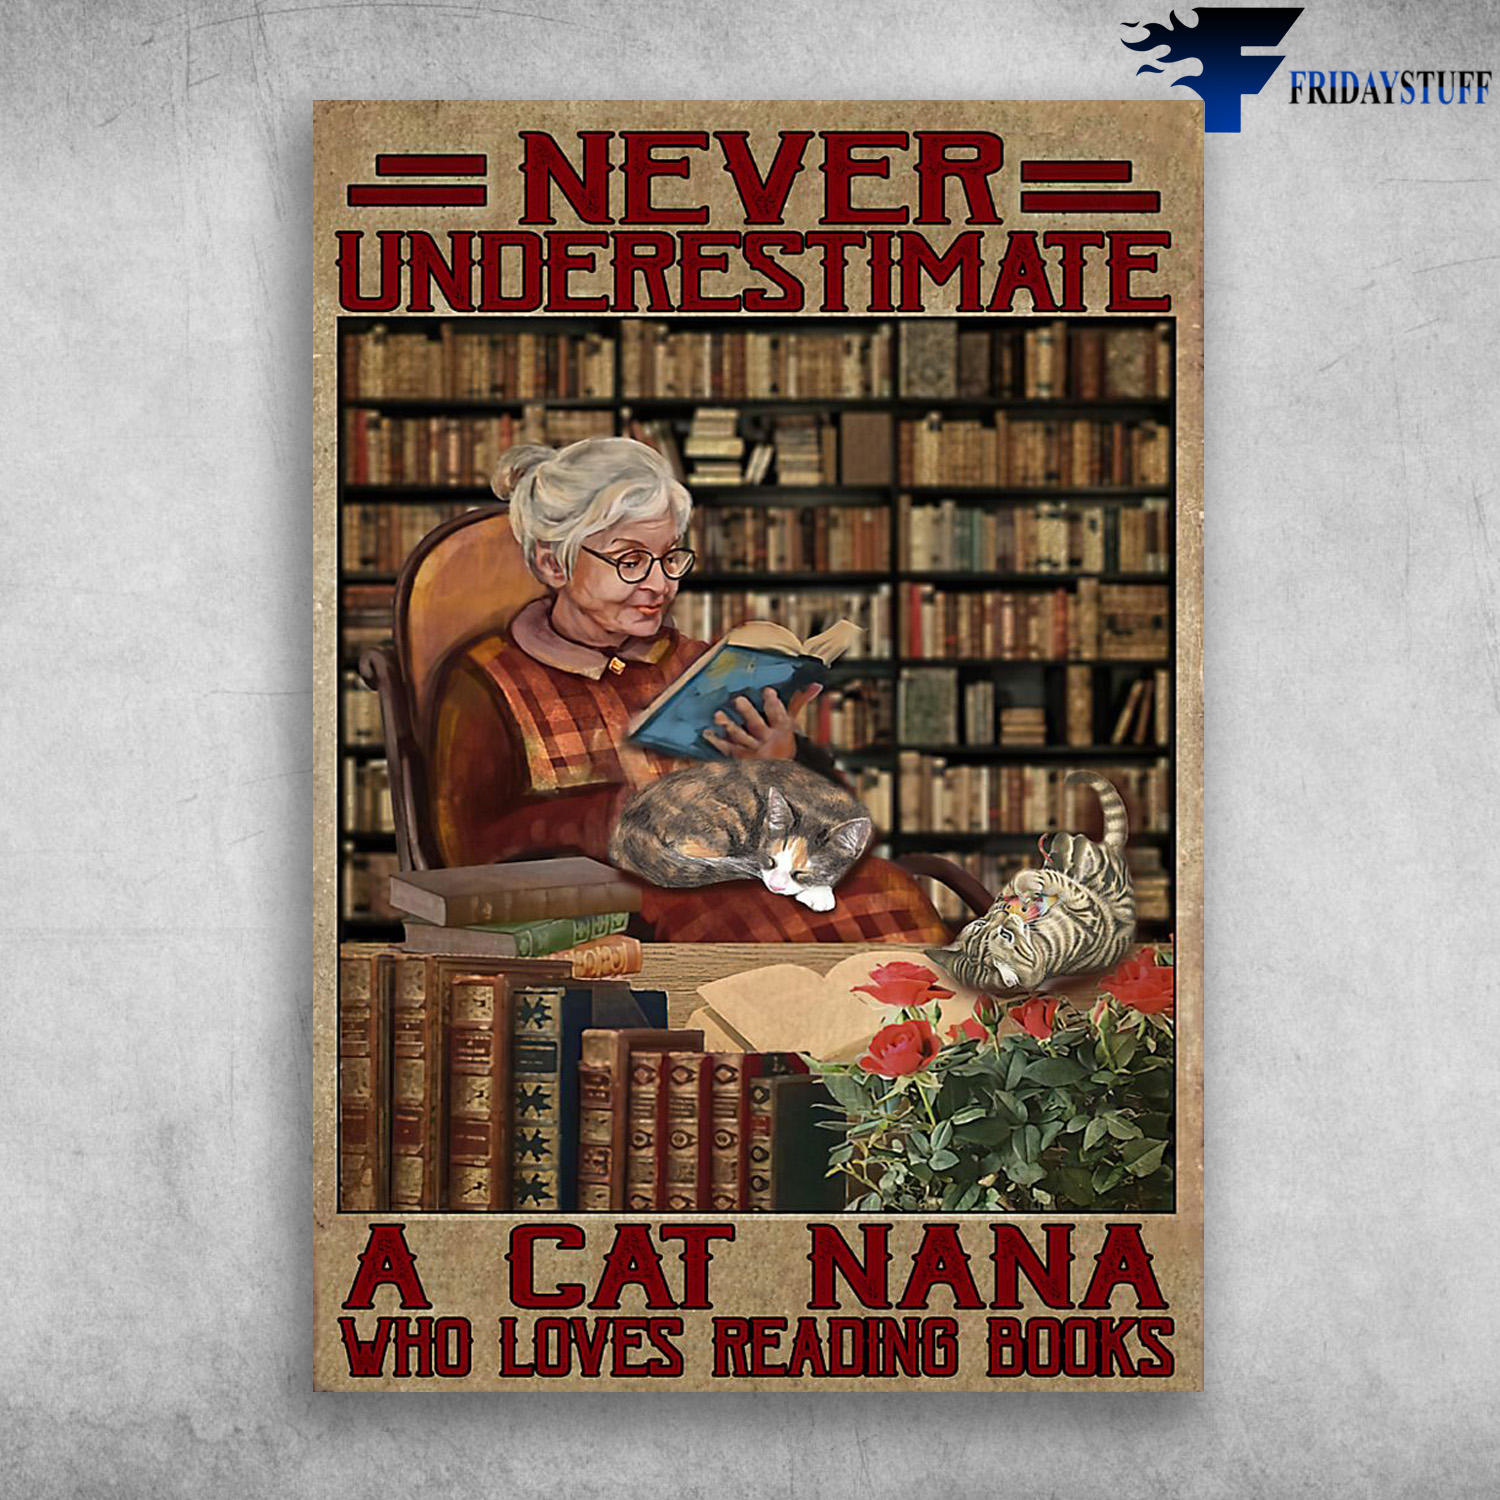 Old Wonen, Reading Book, Cat - Never Underestimate A Cat Nana, Who Loves Reading Books